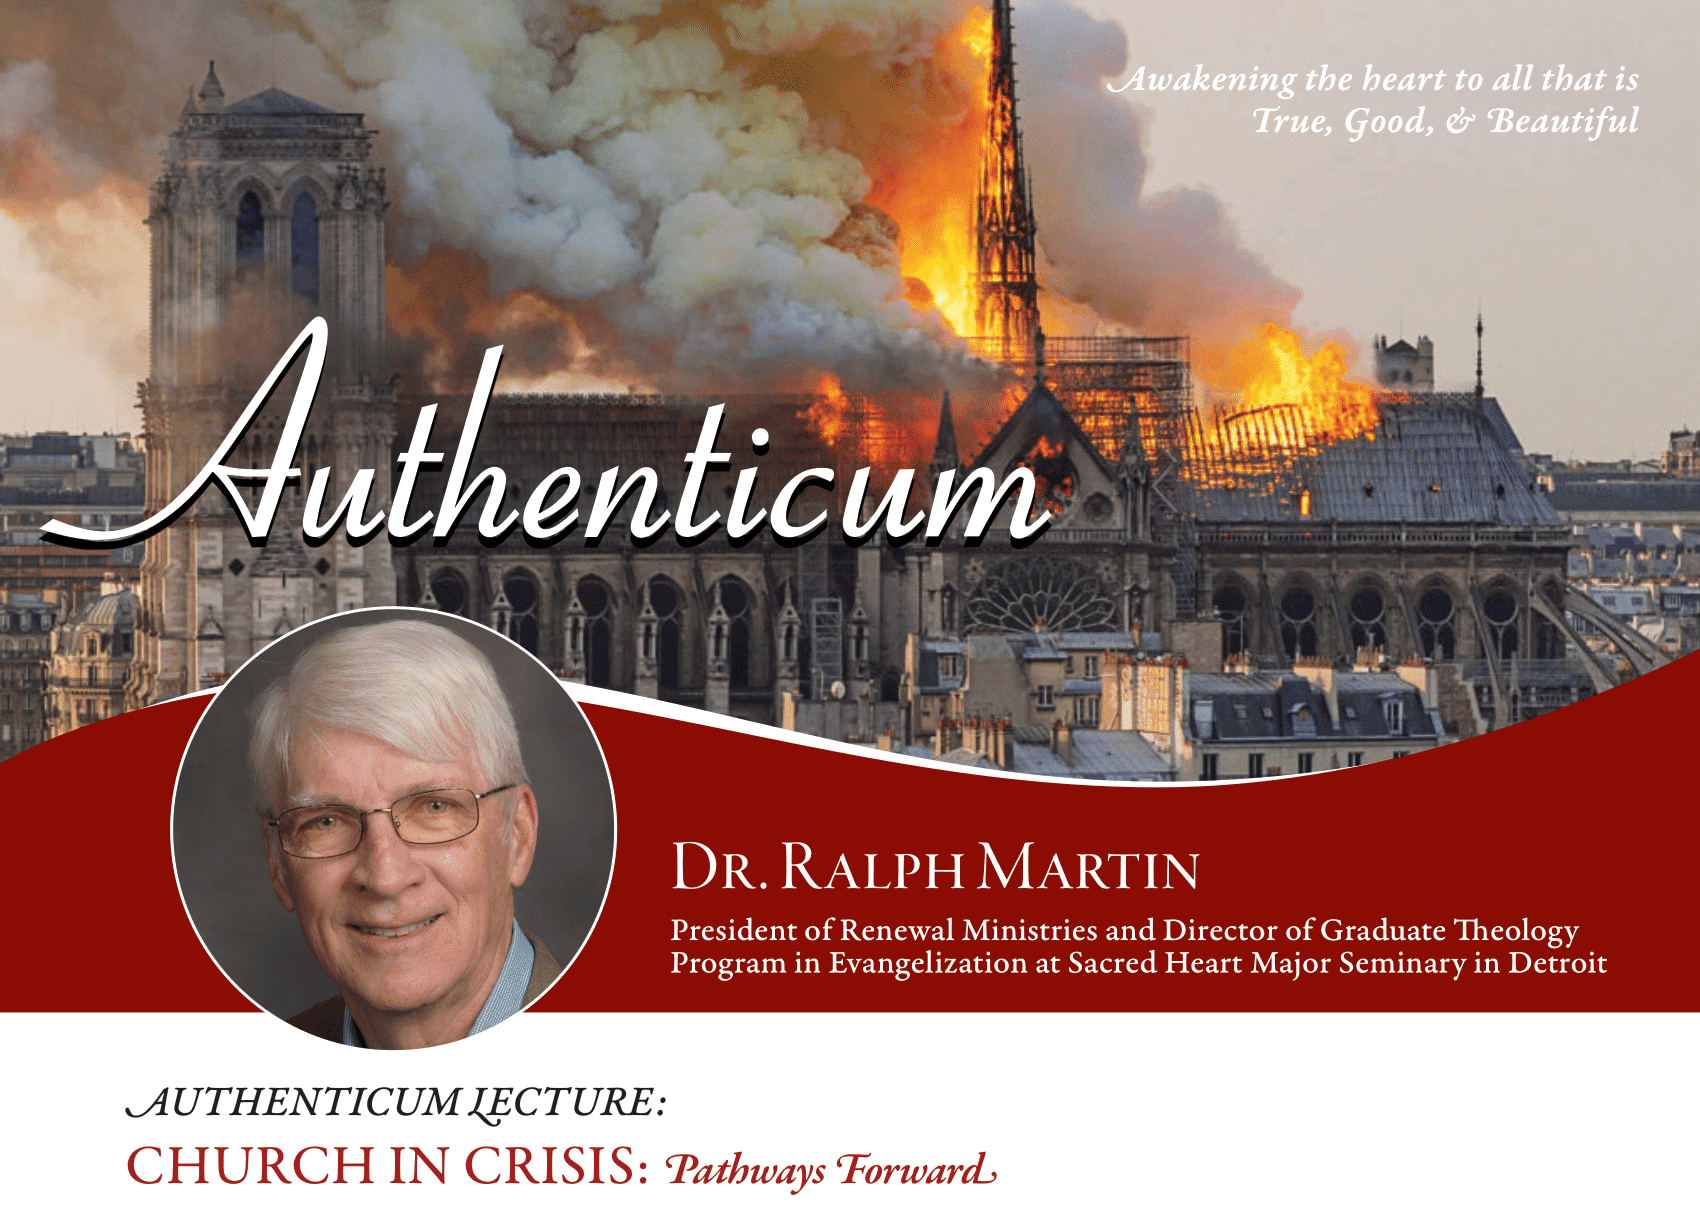 March Authenticum with Dr. Ralph Martin